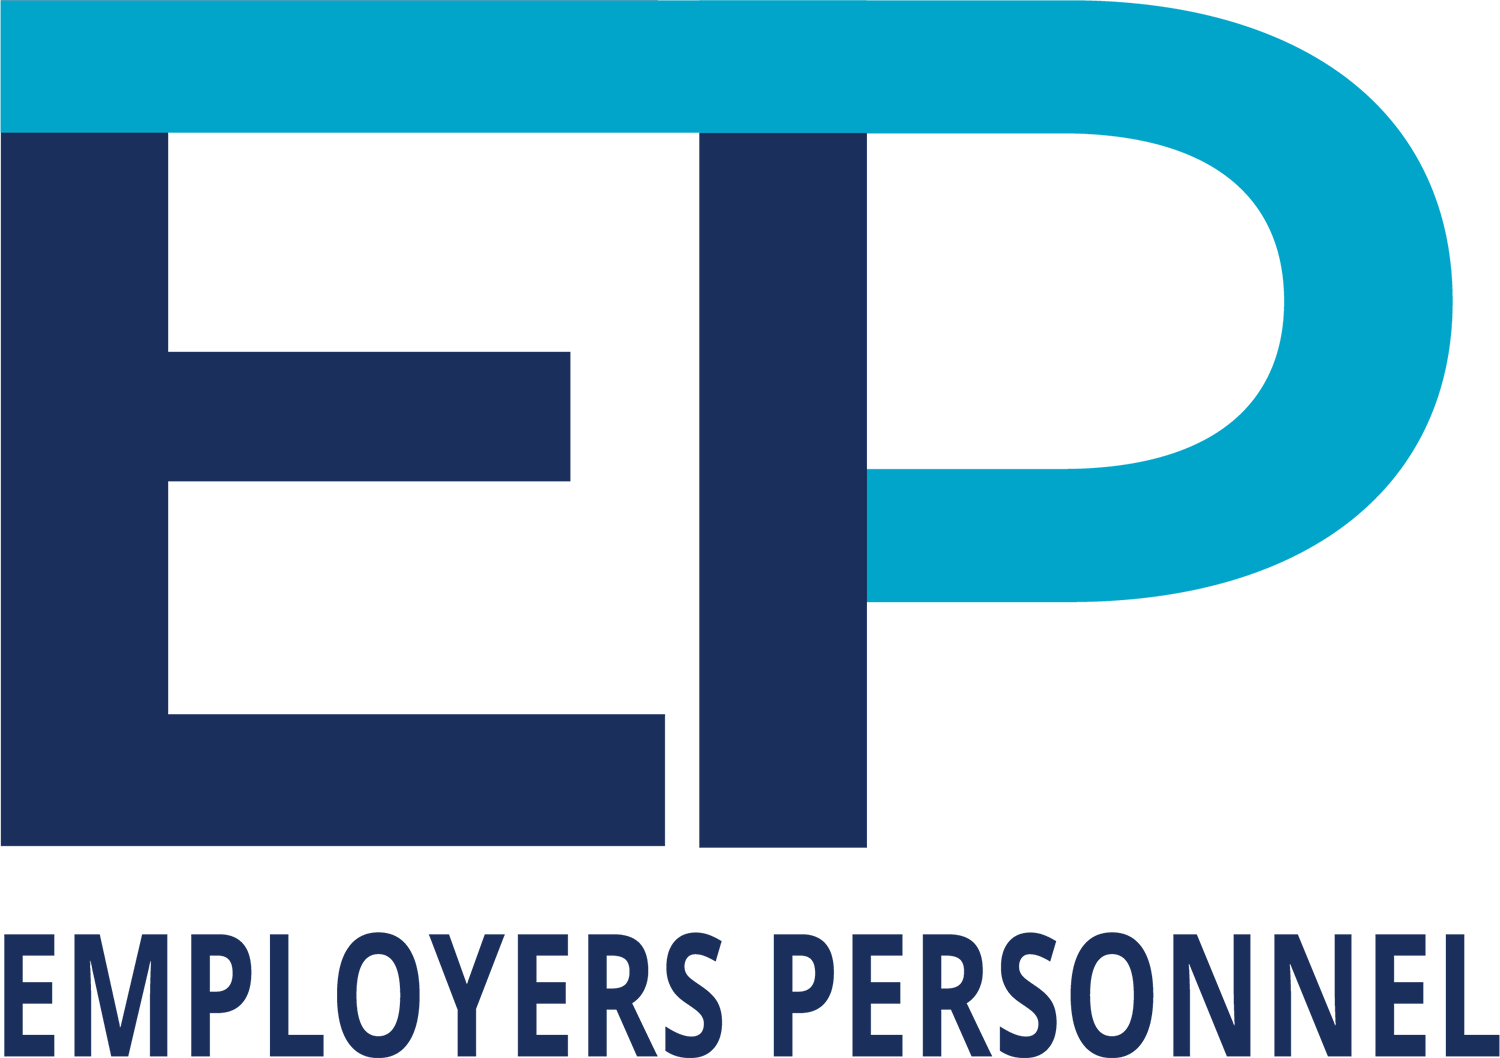 Employers Personnel